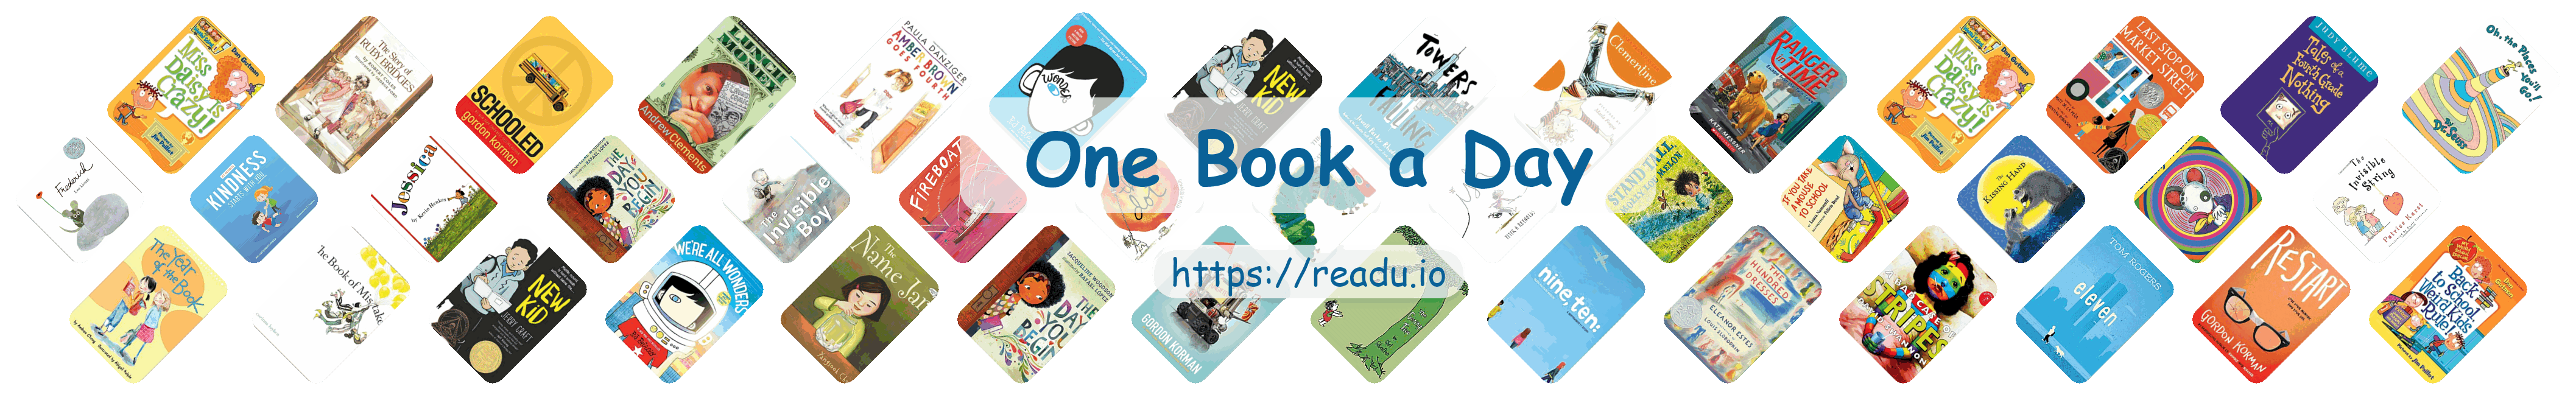 readu-one-book-a-day-sep-17.png